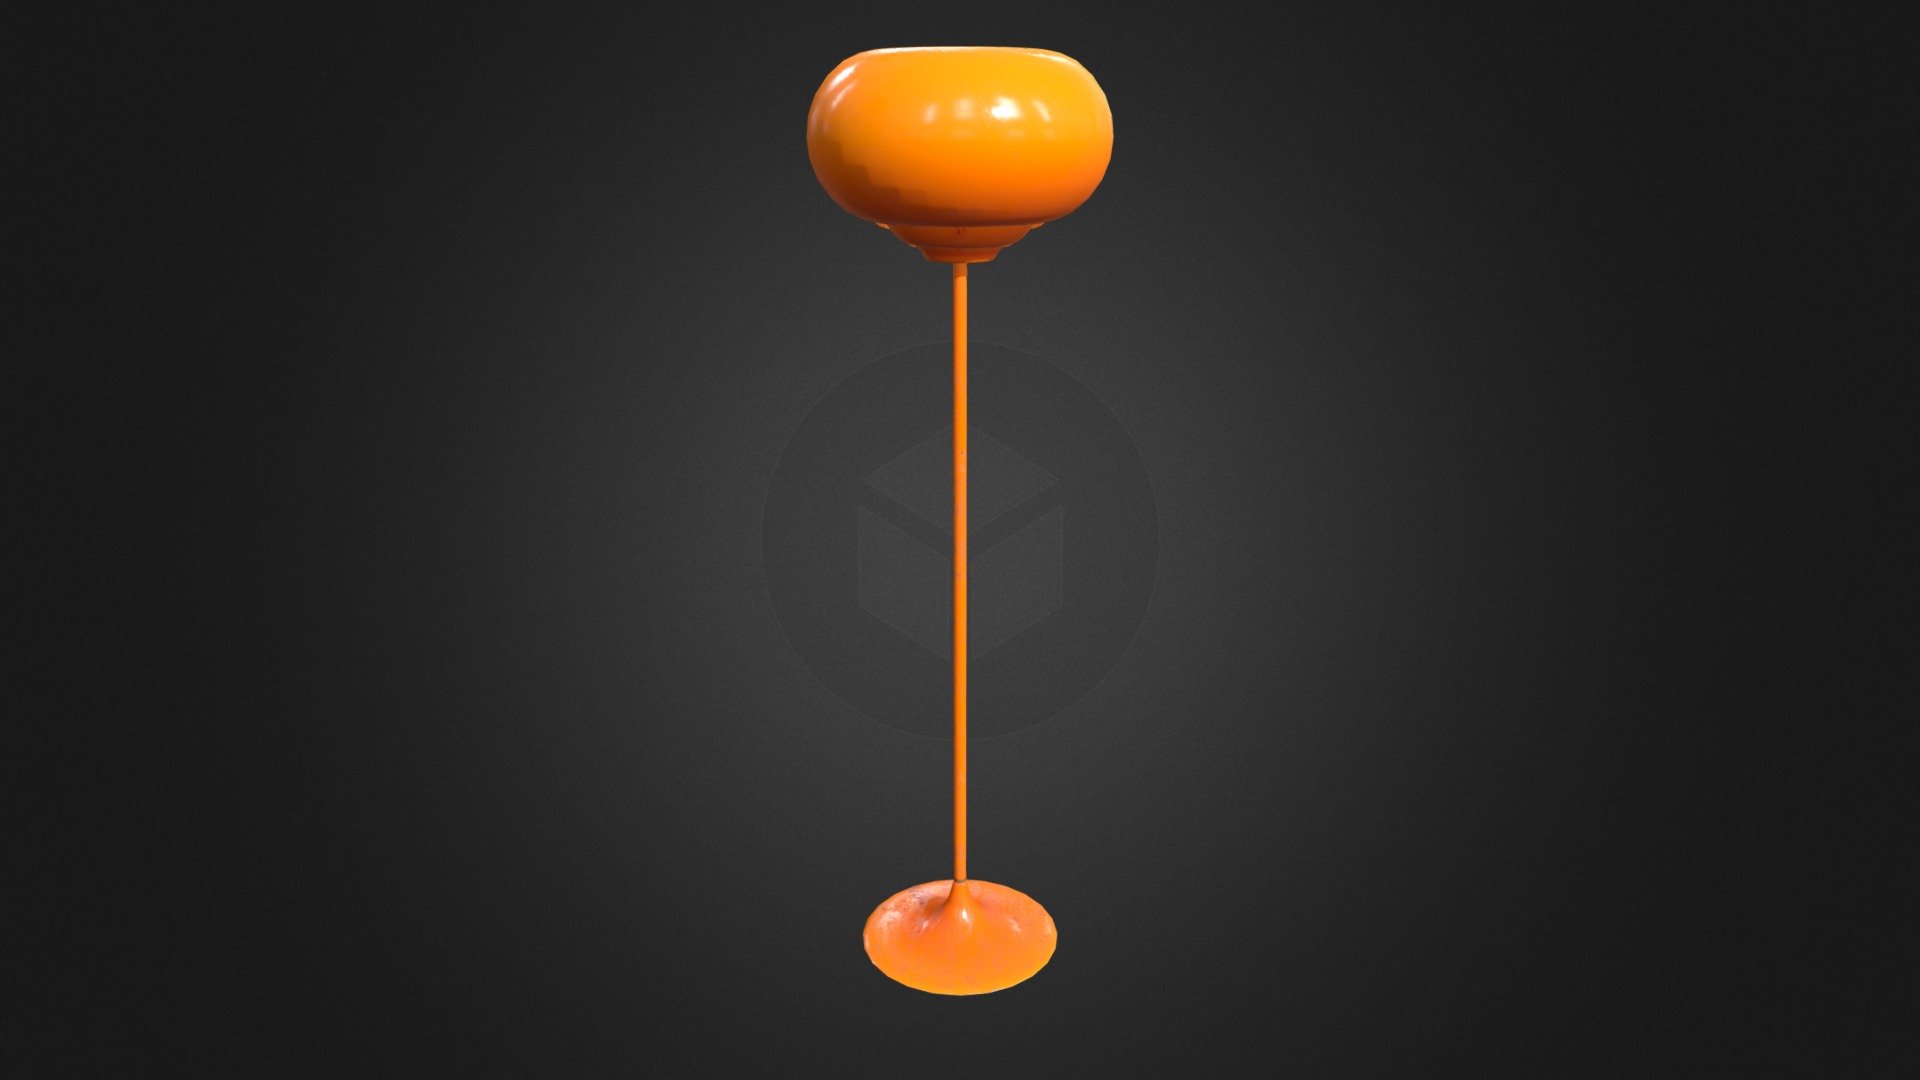 A floor lamp based on a design by Bergboms.

This is part of a set of Mid Century Modern objects I challenged myself to complete in a few days 3d model